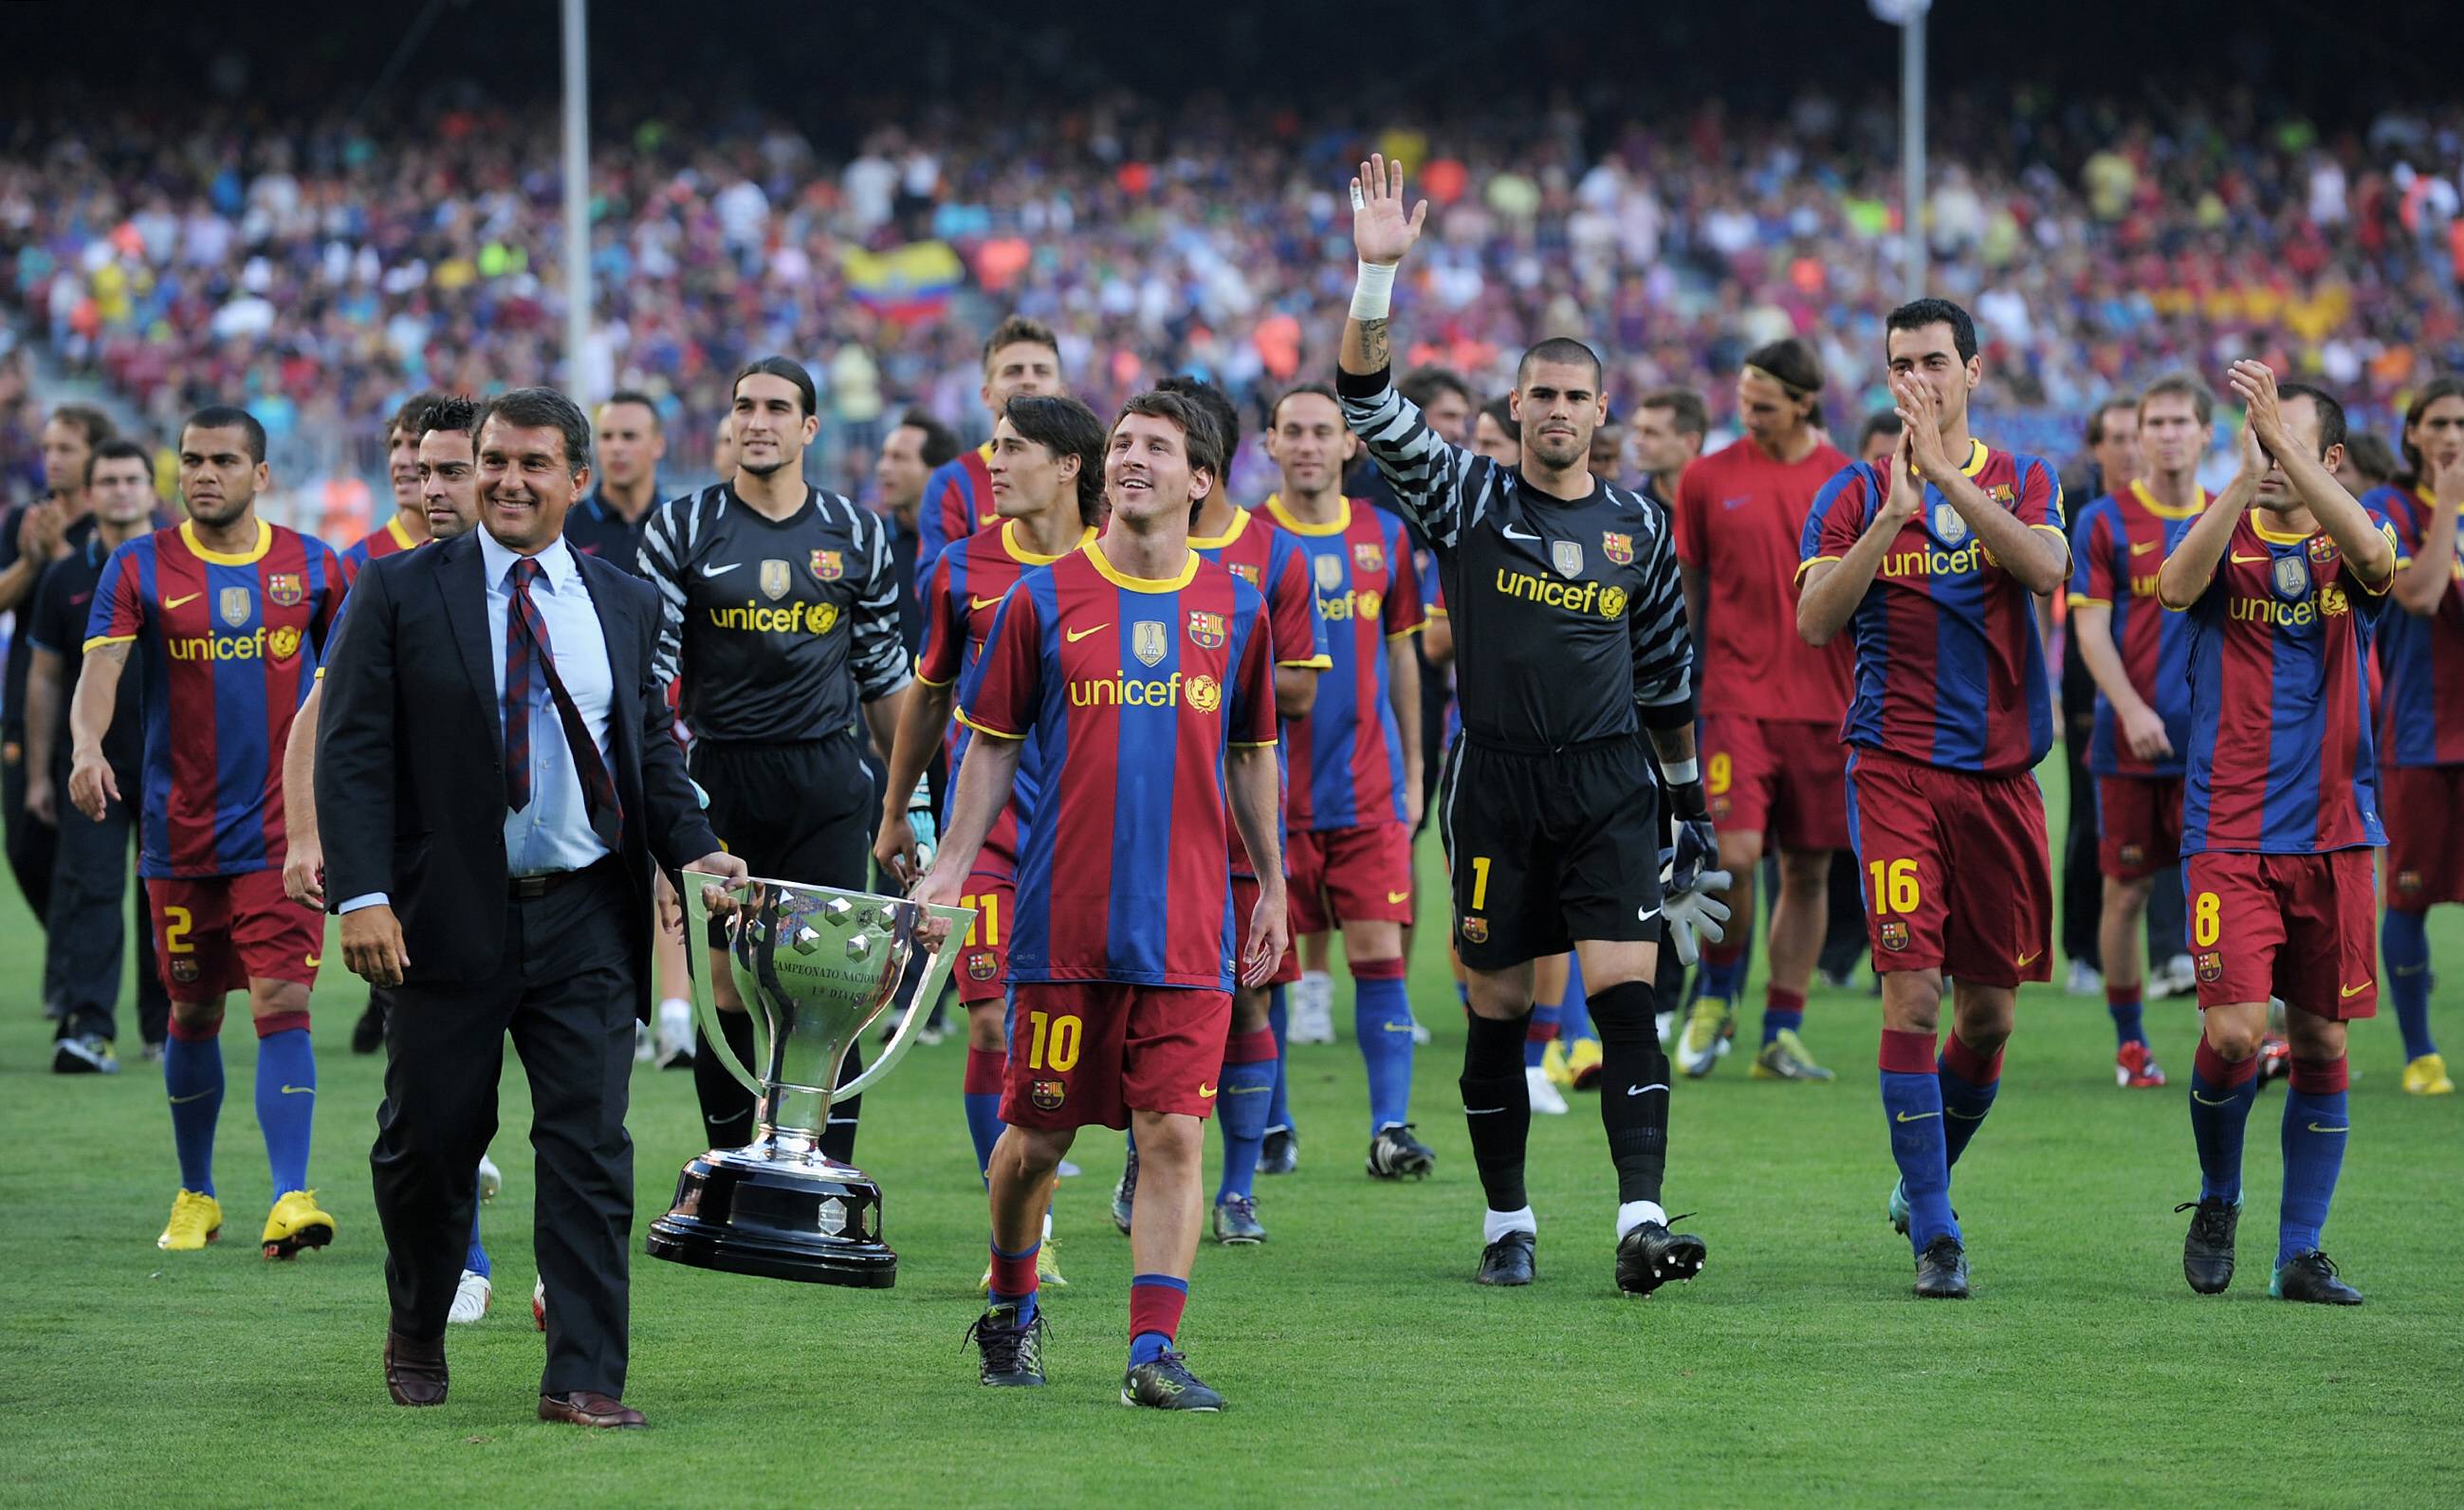 Lionel Messi won the Champions League with Barcelona in 2011 under Joan Laporta's tenure